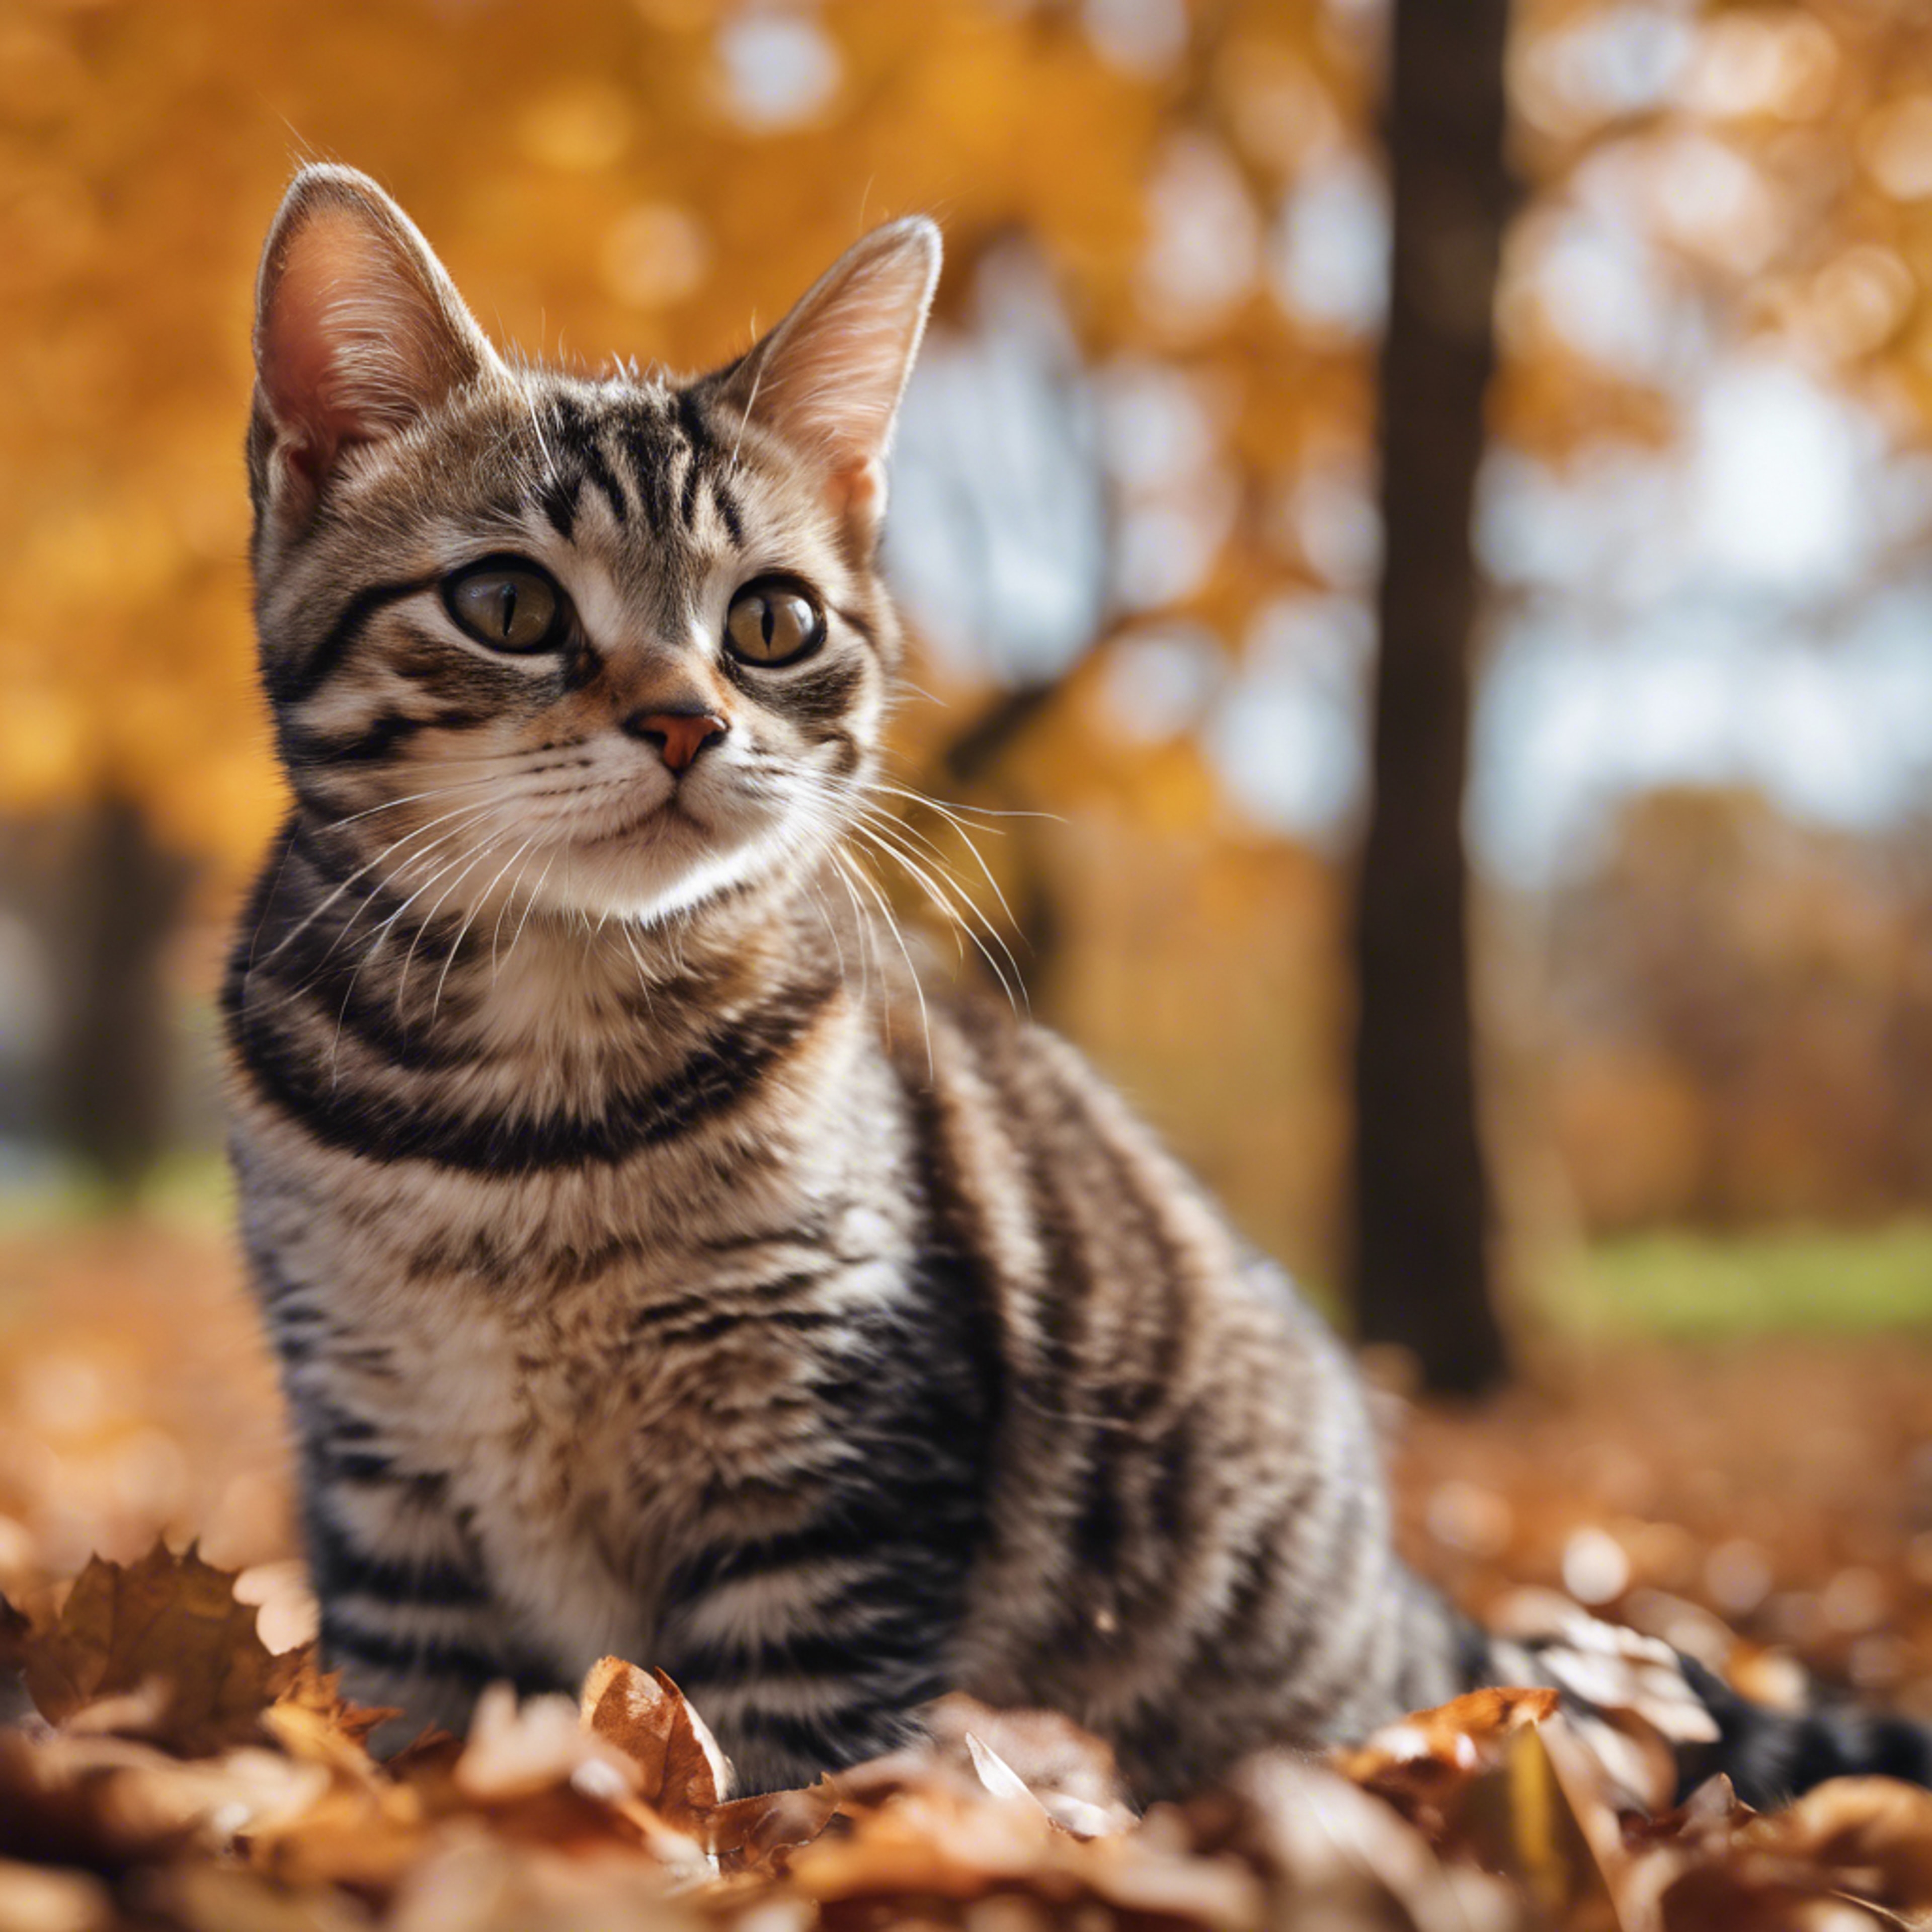 A classic brown tabby American Shorthair kitten lost in her daydreams, busy watching a world full of robust maple trees dancing with autumn winds. Papel de parede[94549d28d418408fbb13]